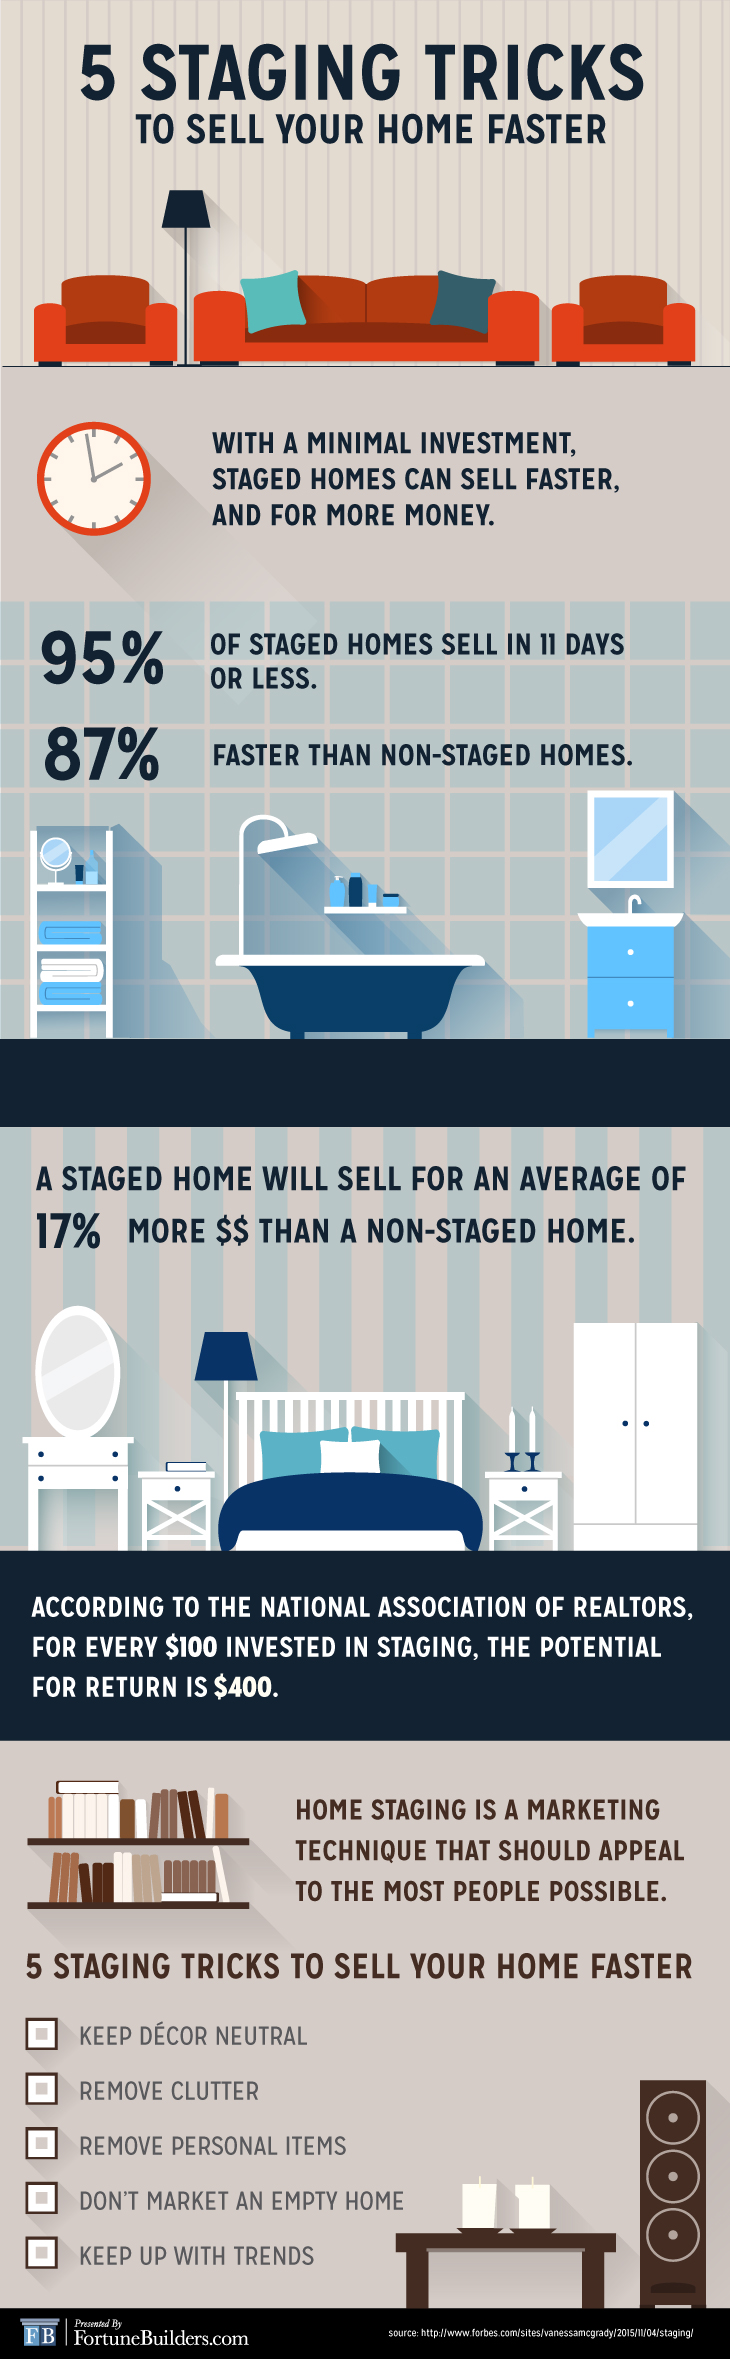 Staging tricks to sell faster